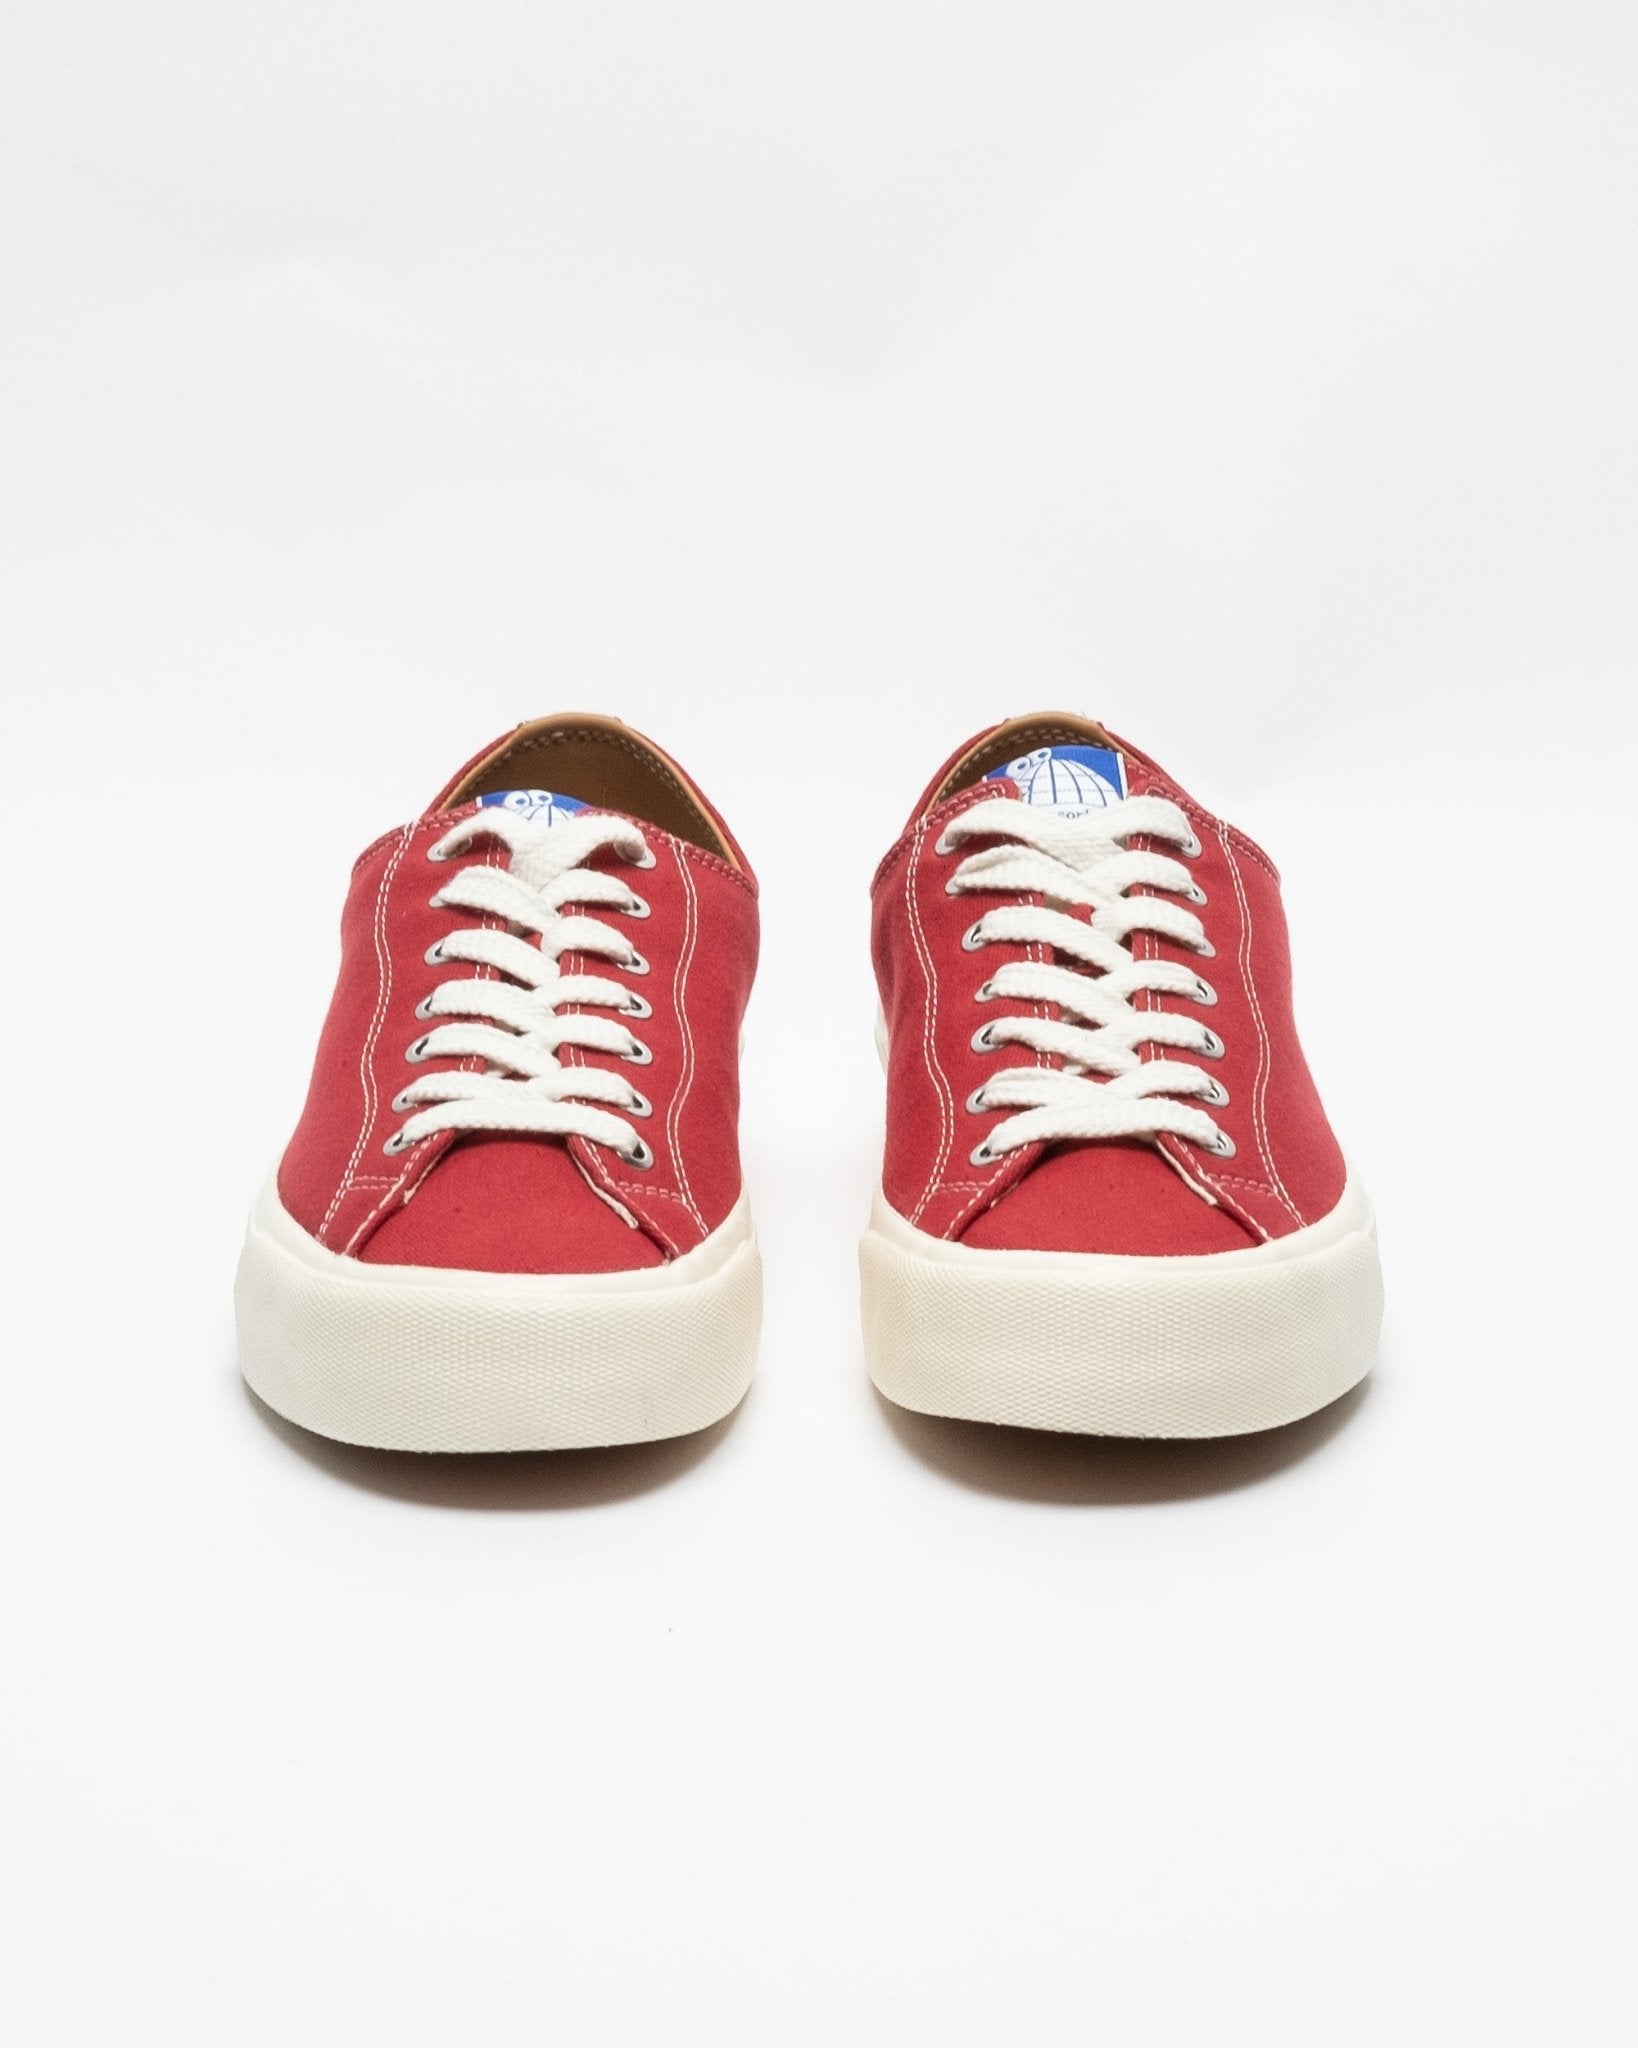 VM003-Canvas LO Classic Red/White - Meadow